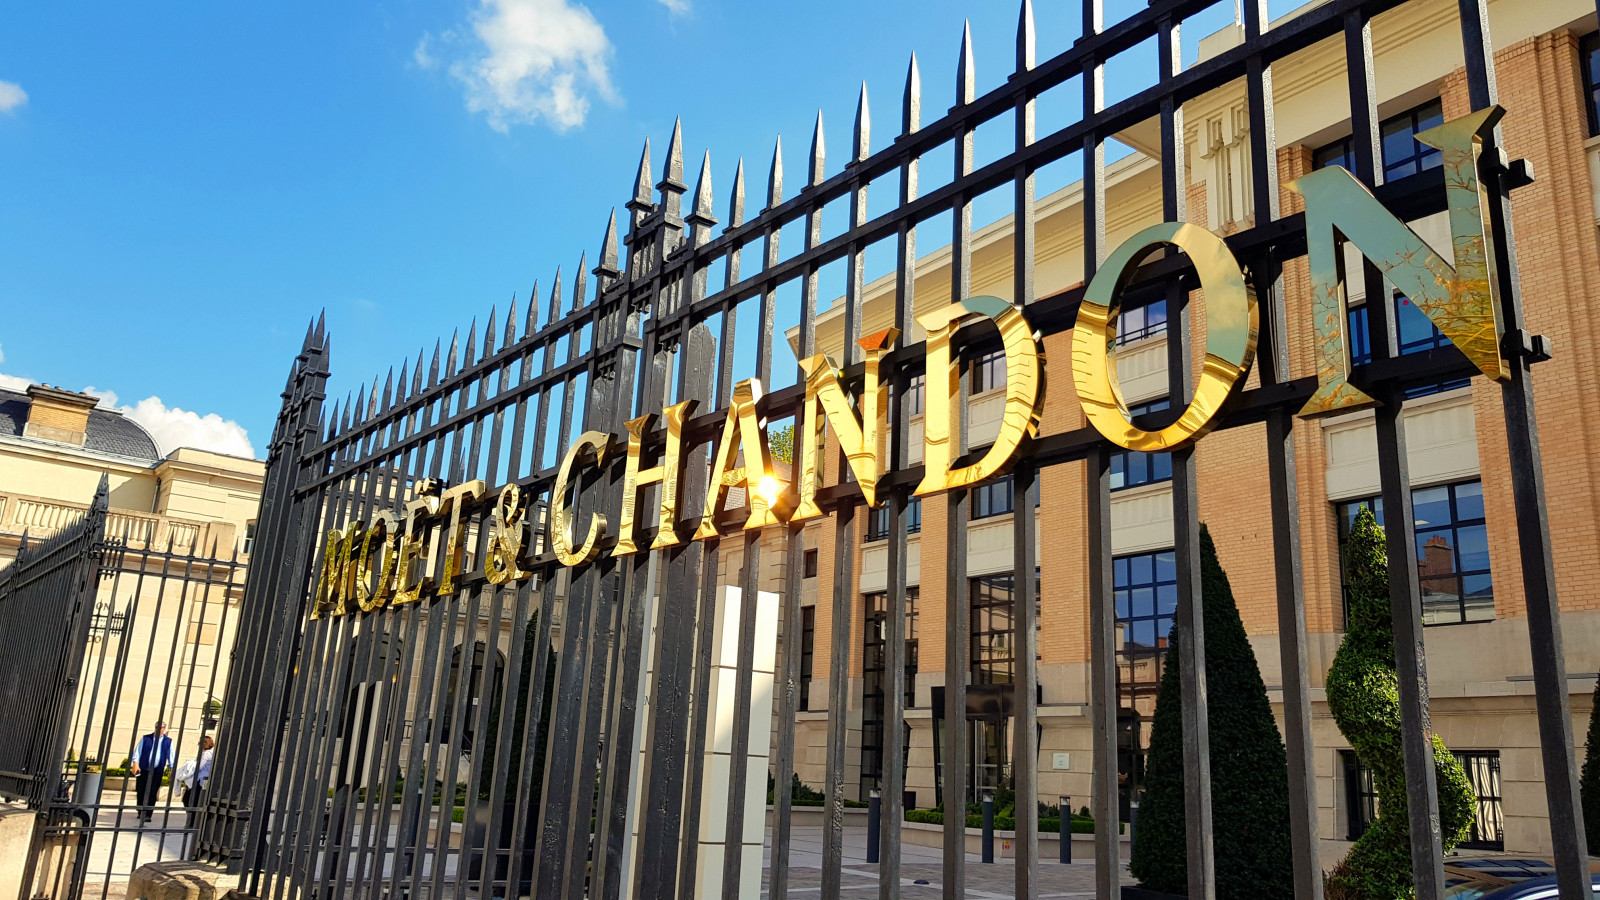 Moet Chandon Champagne House on Rue de Champagne in Epernay France